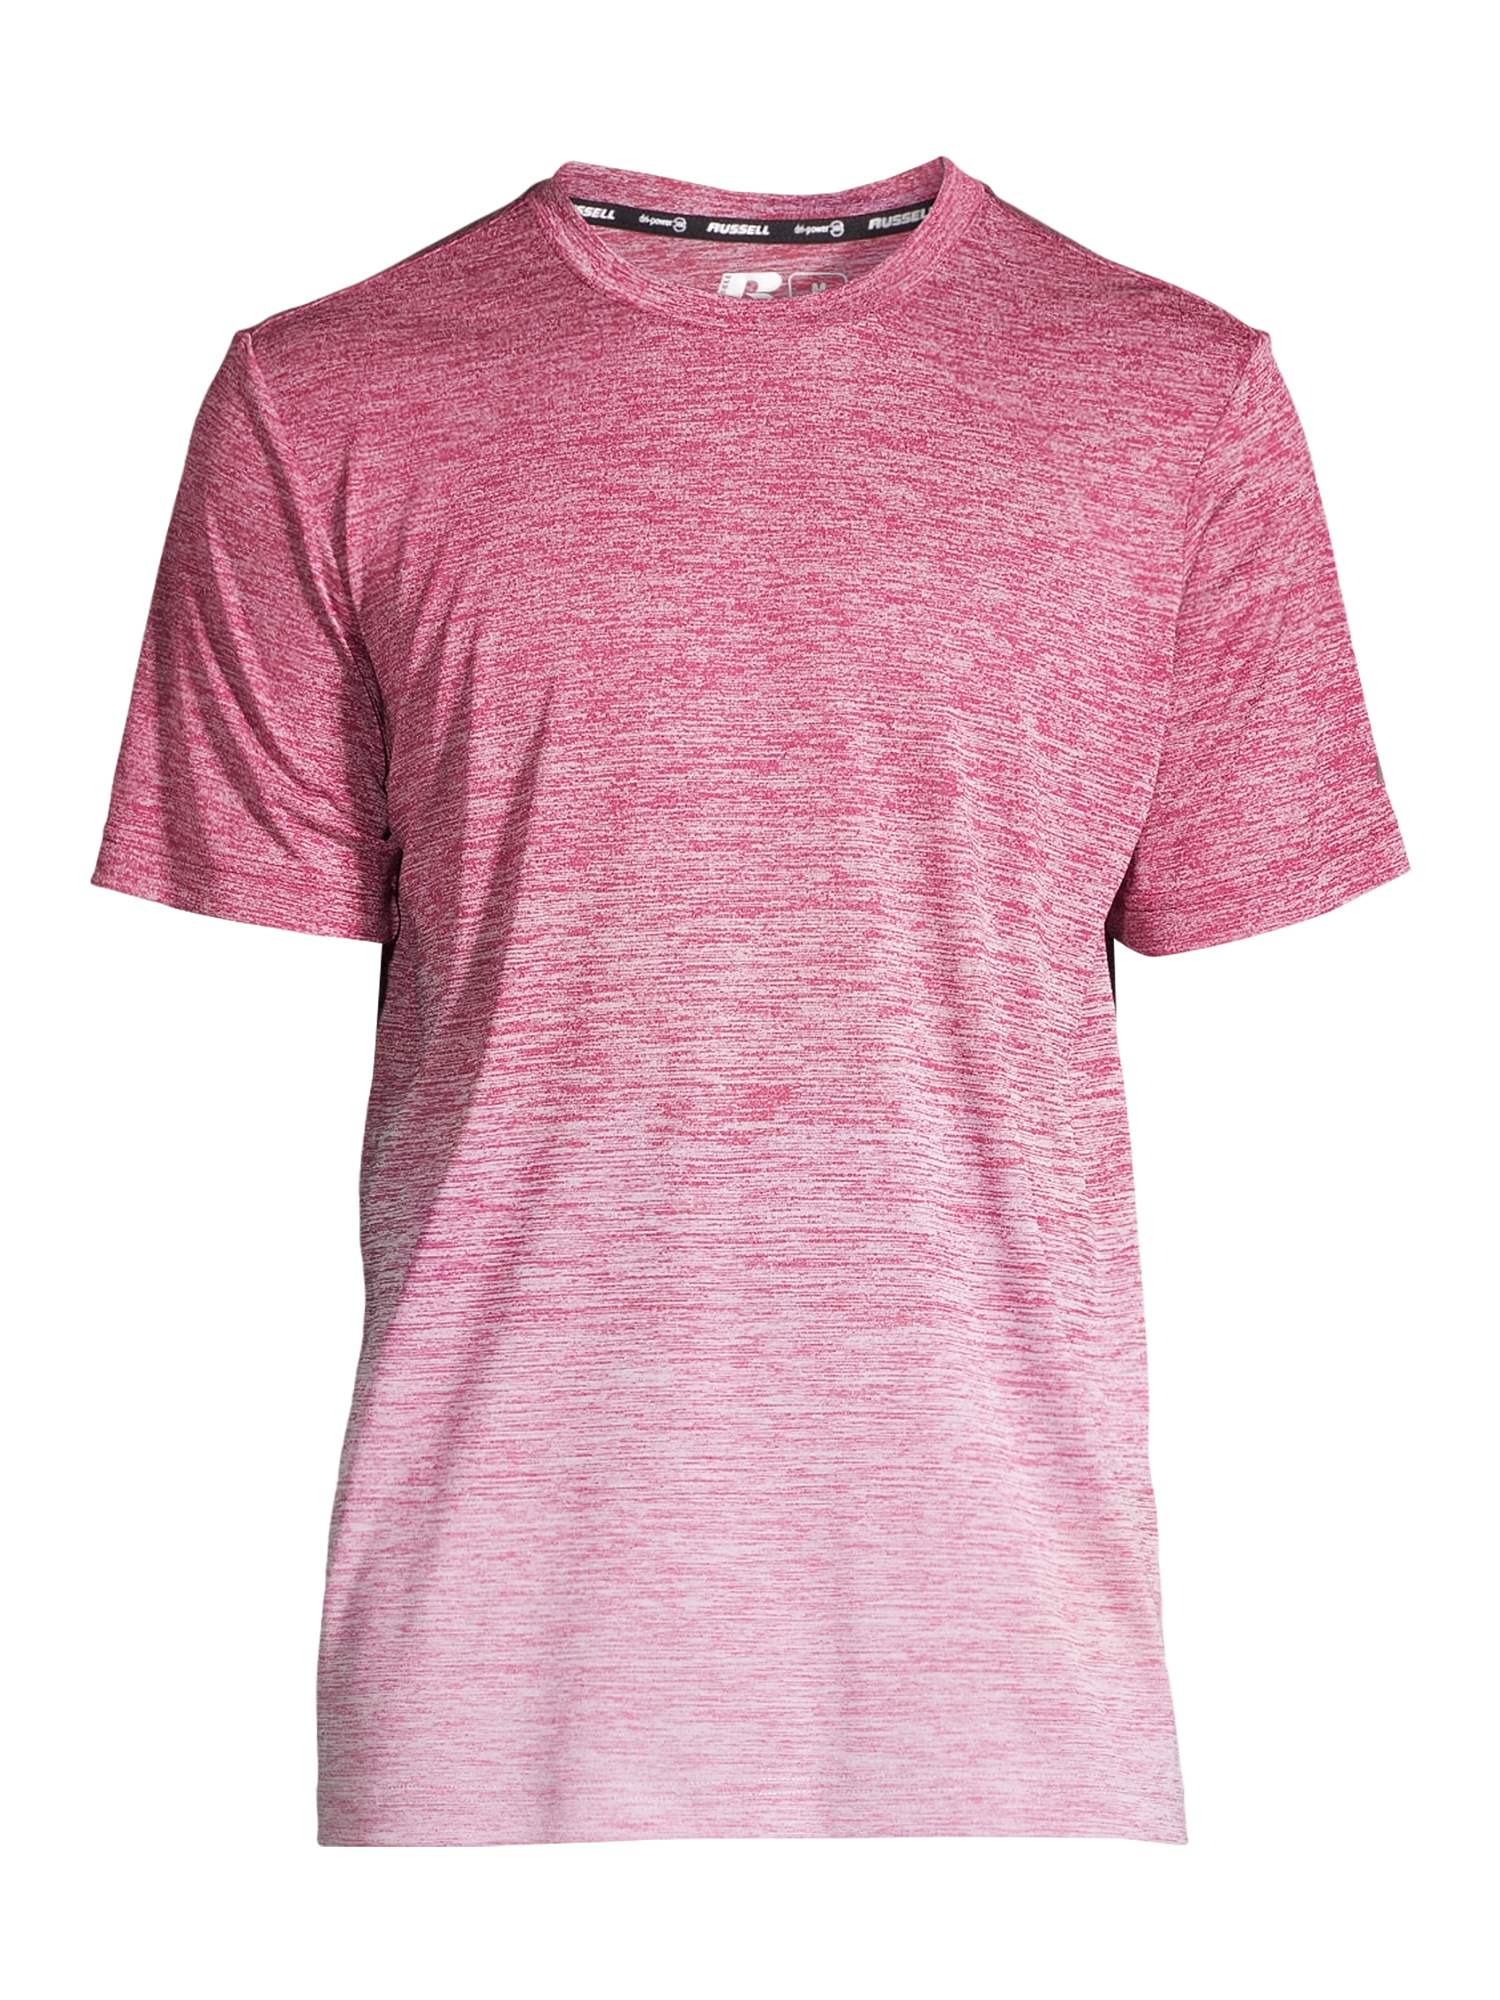 Russell Men's and Big Men's Ombre Performance Tee, up to Size 5XL - image 2 of 6